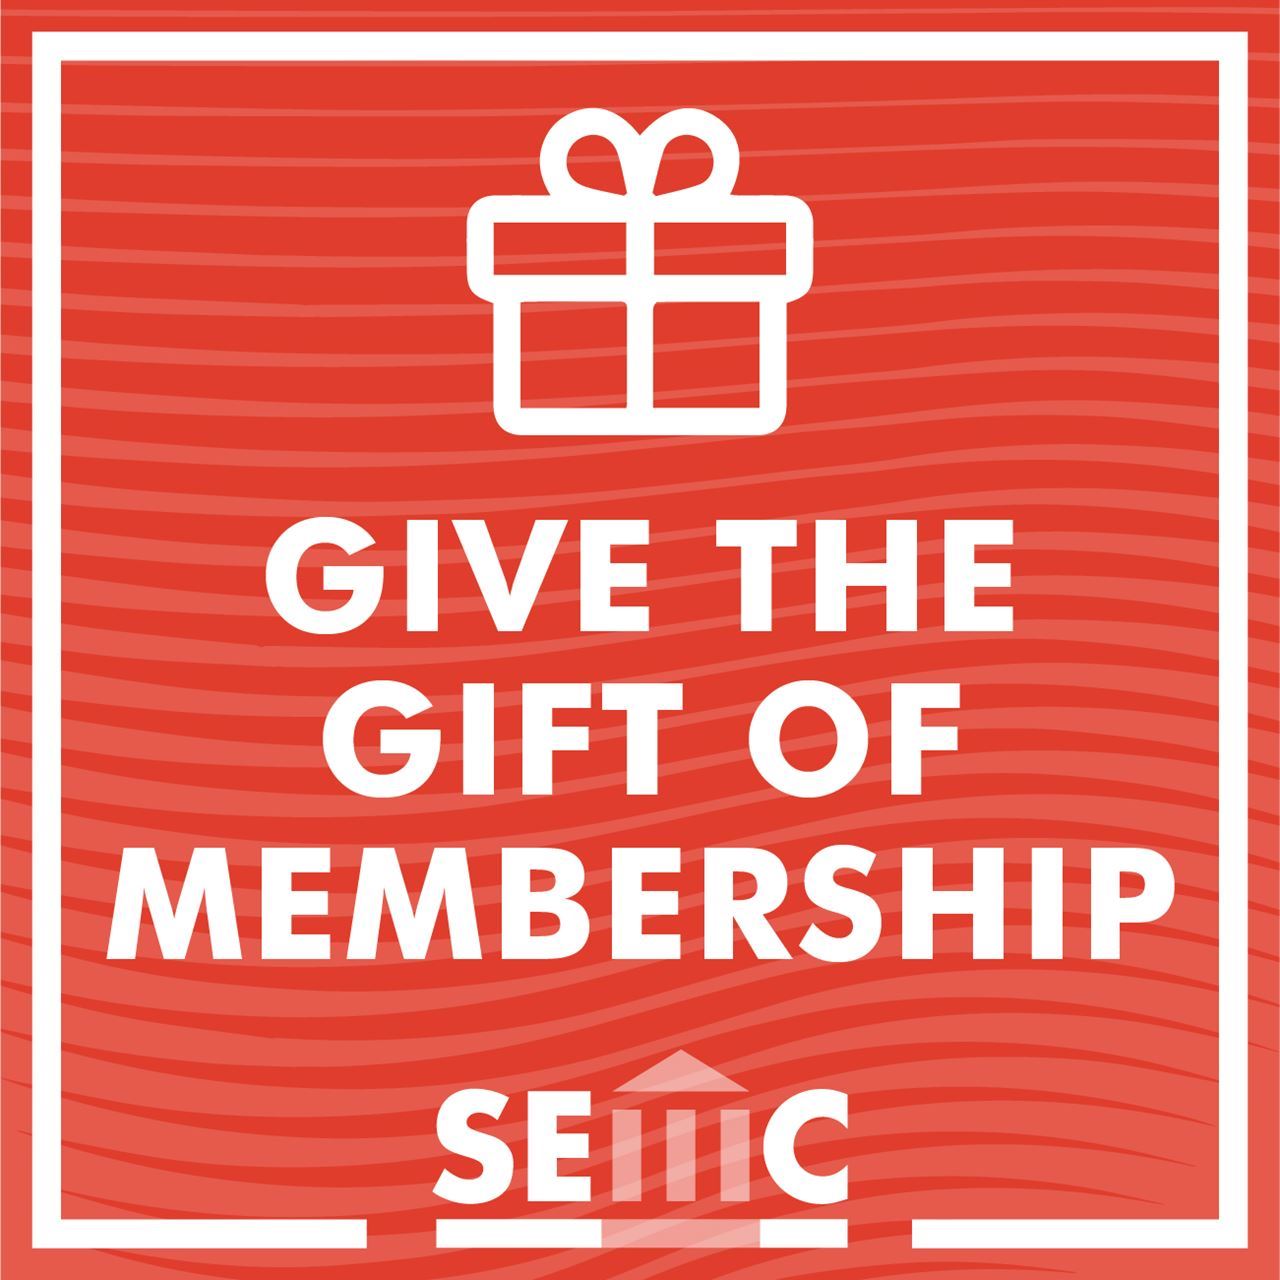 A red striped background, with a present box graphic and the words “Give the Gift of Membership” centered. The SEMC logo is also at the bottom.  